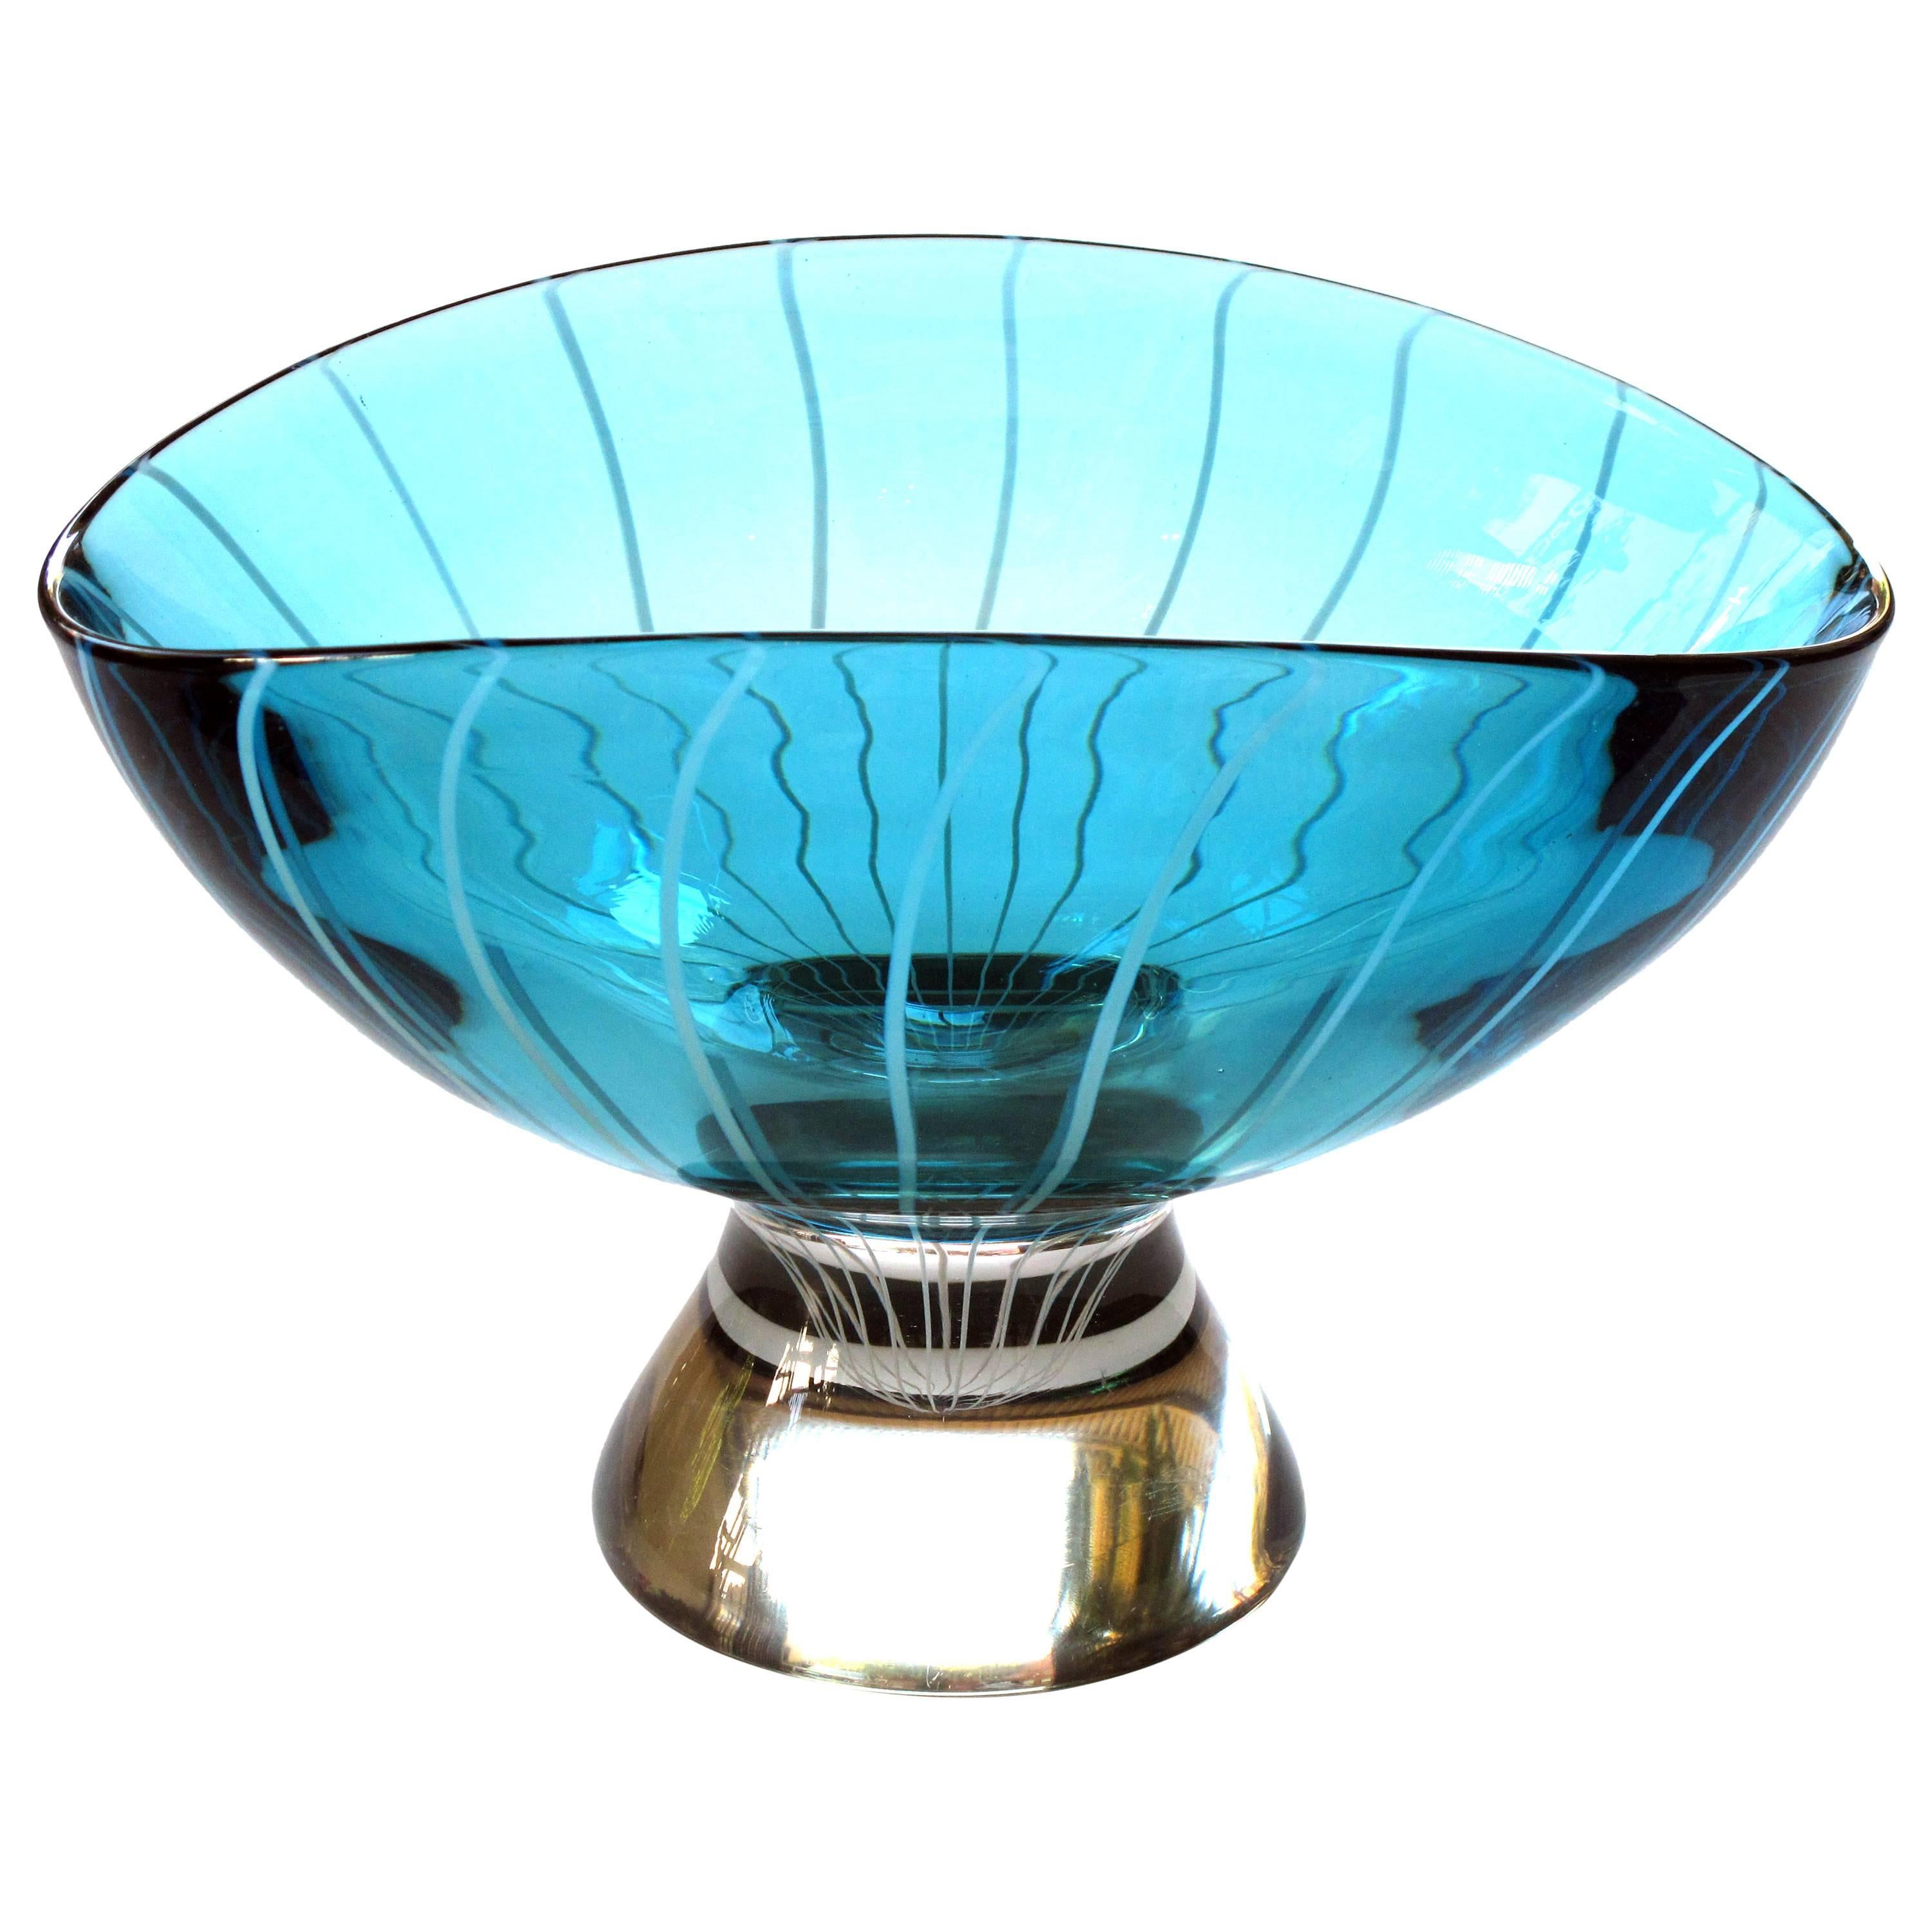 Large-Scale Murano 1960s Teal Art Glass Bowl with White Swirl Decoration